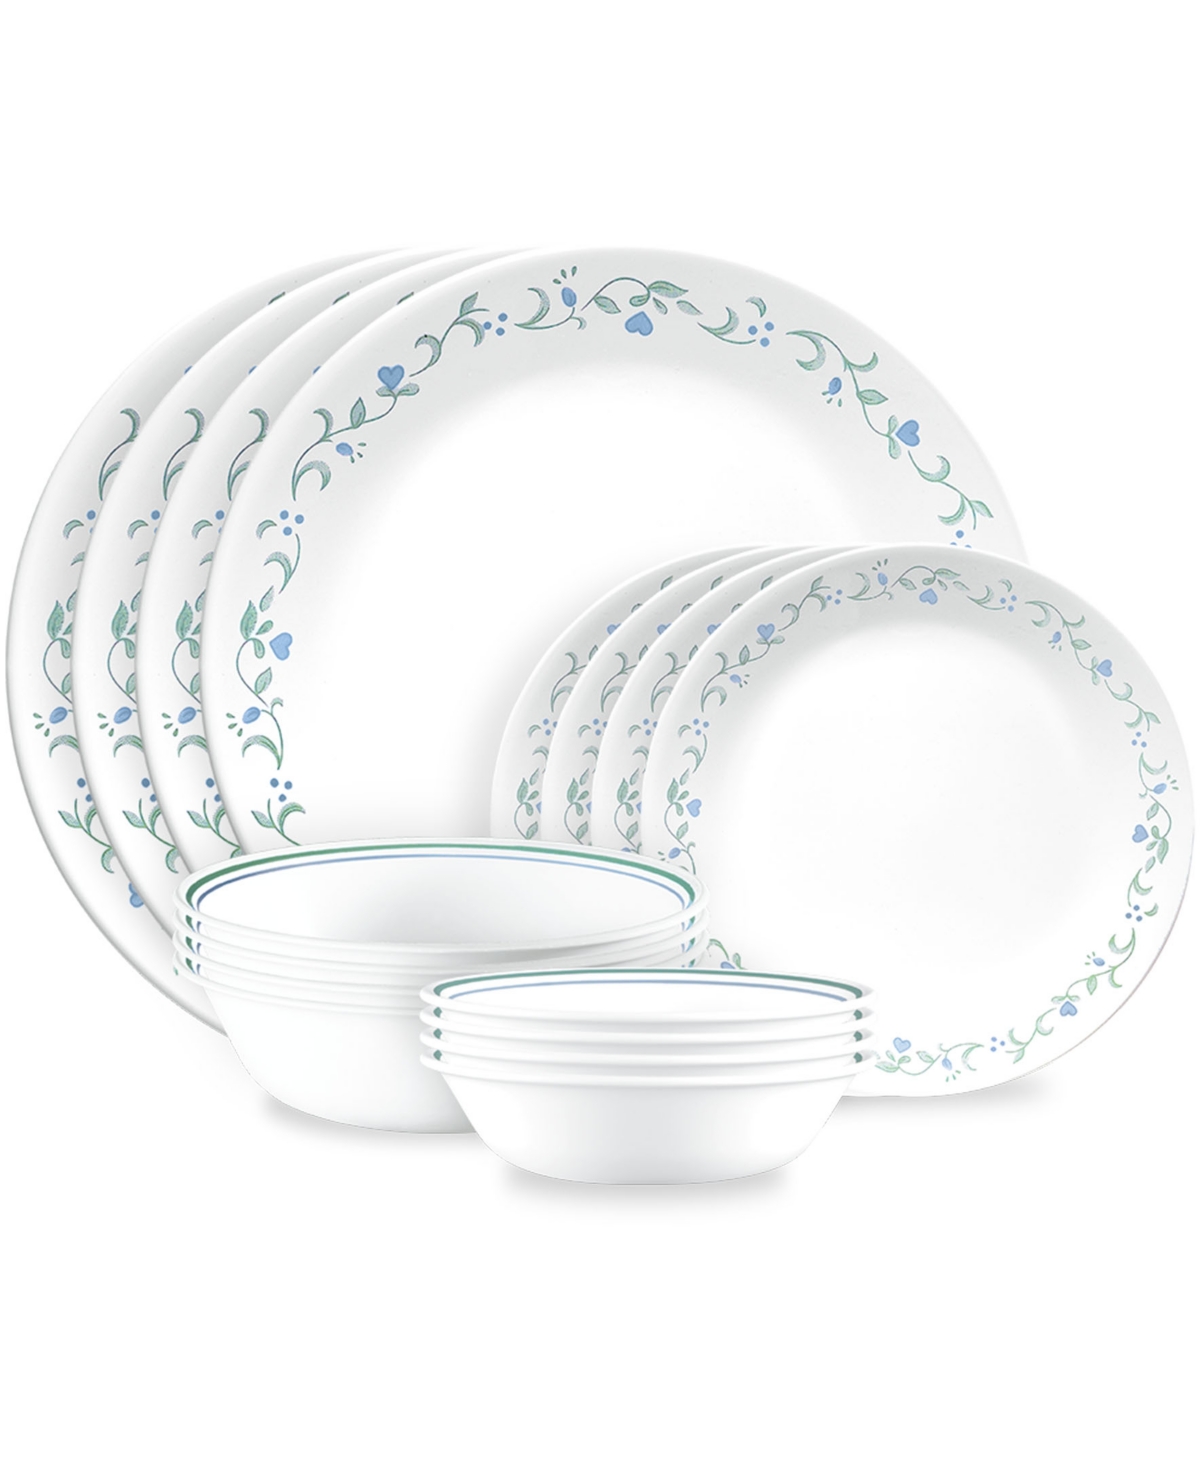 Country Cottage 16-pc Dinnerware Set, Service for 4 - White